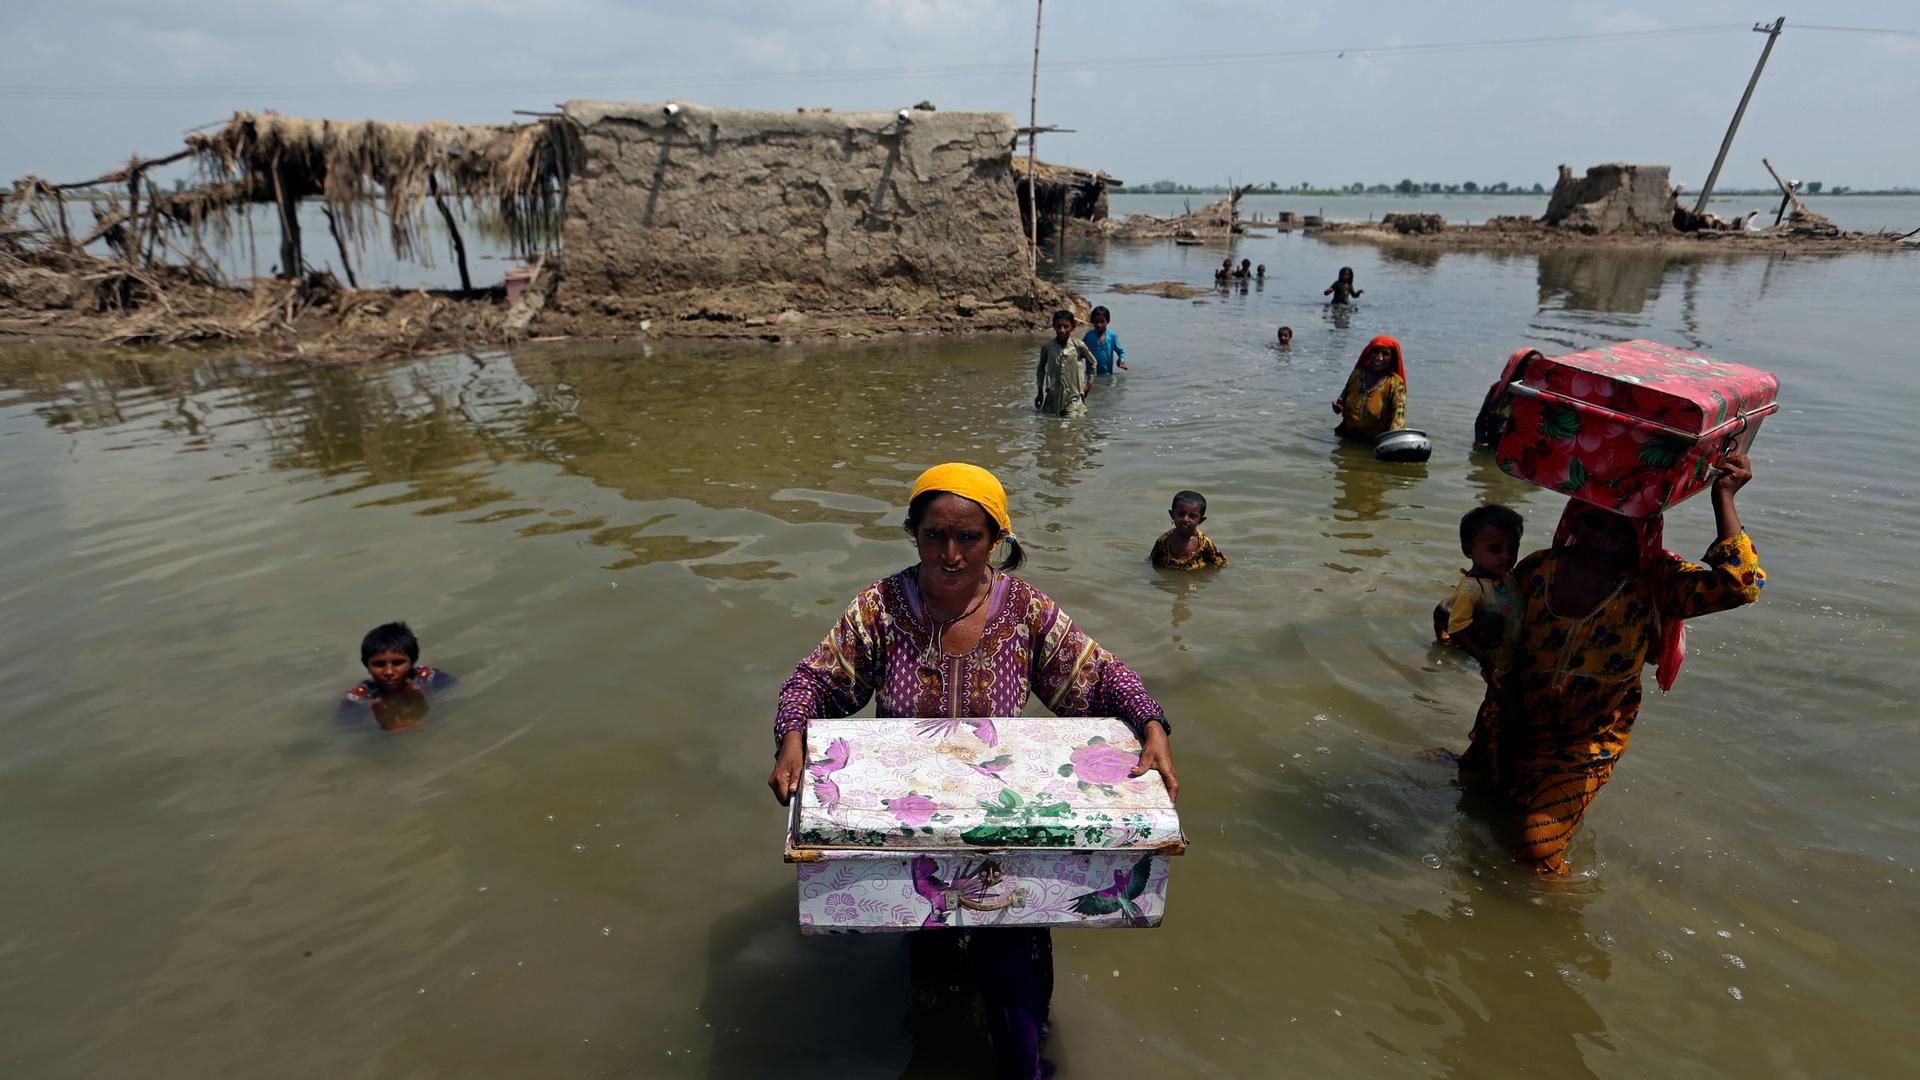 Women carry belongings salvaged from their flooded home after monsoon rains, in the Qambar Shahdadkot district of Sindh Province, of Pakistan, Tuesday, Sept. 6, 2022. 